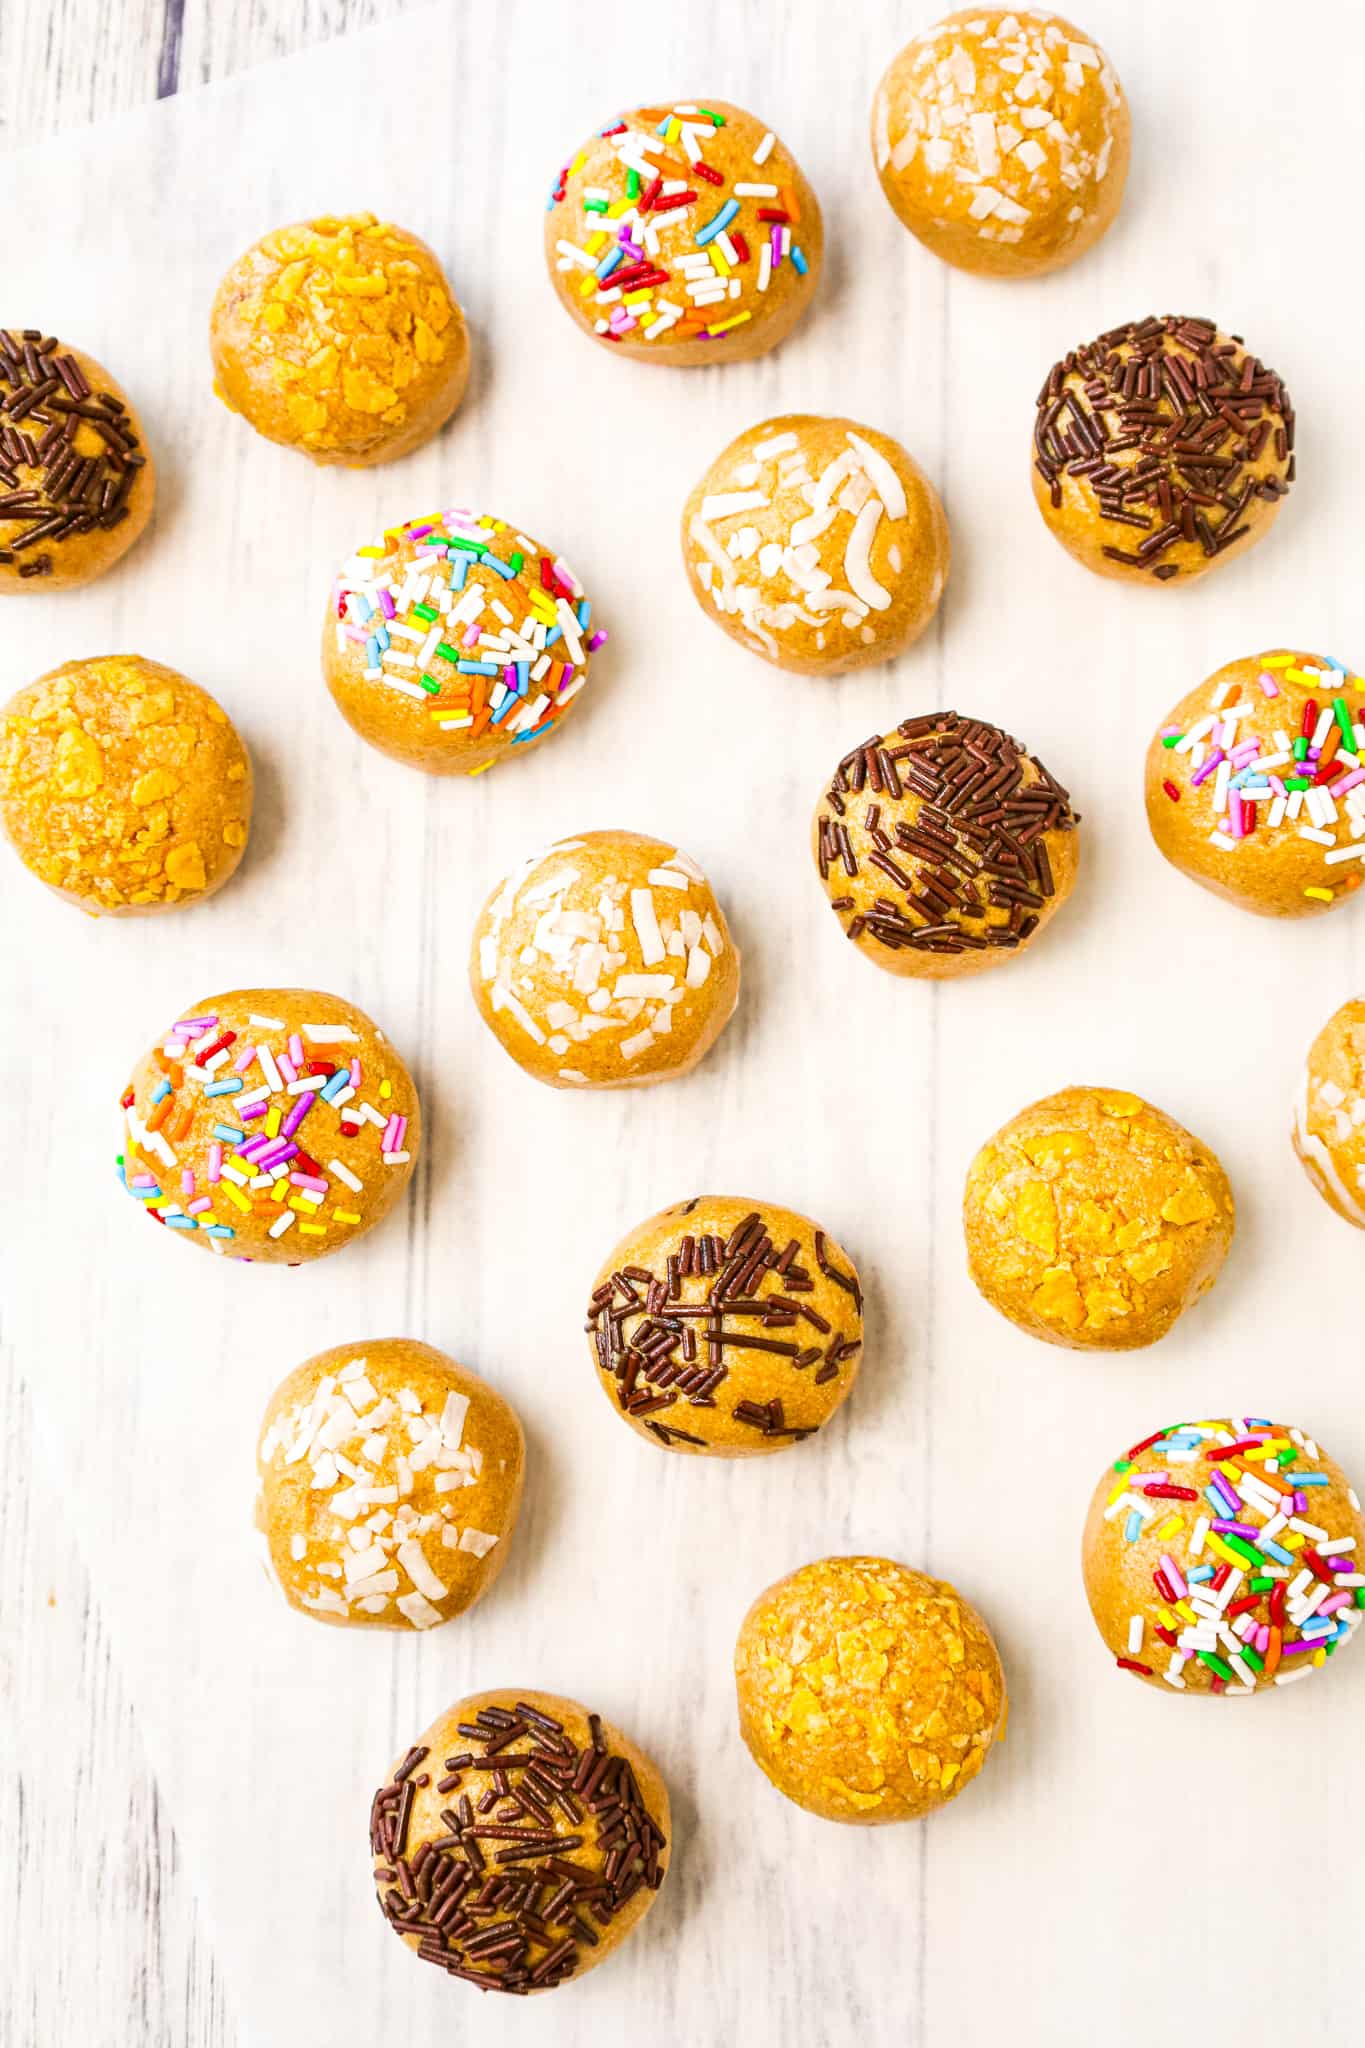 Old Fashioned Peanut Butter Balls are a tasty bite sized snack or dessert recipe that both children and adults will love.